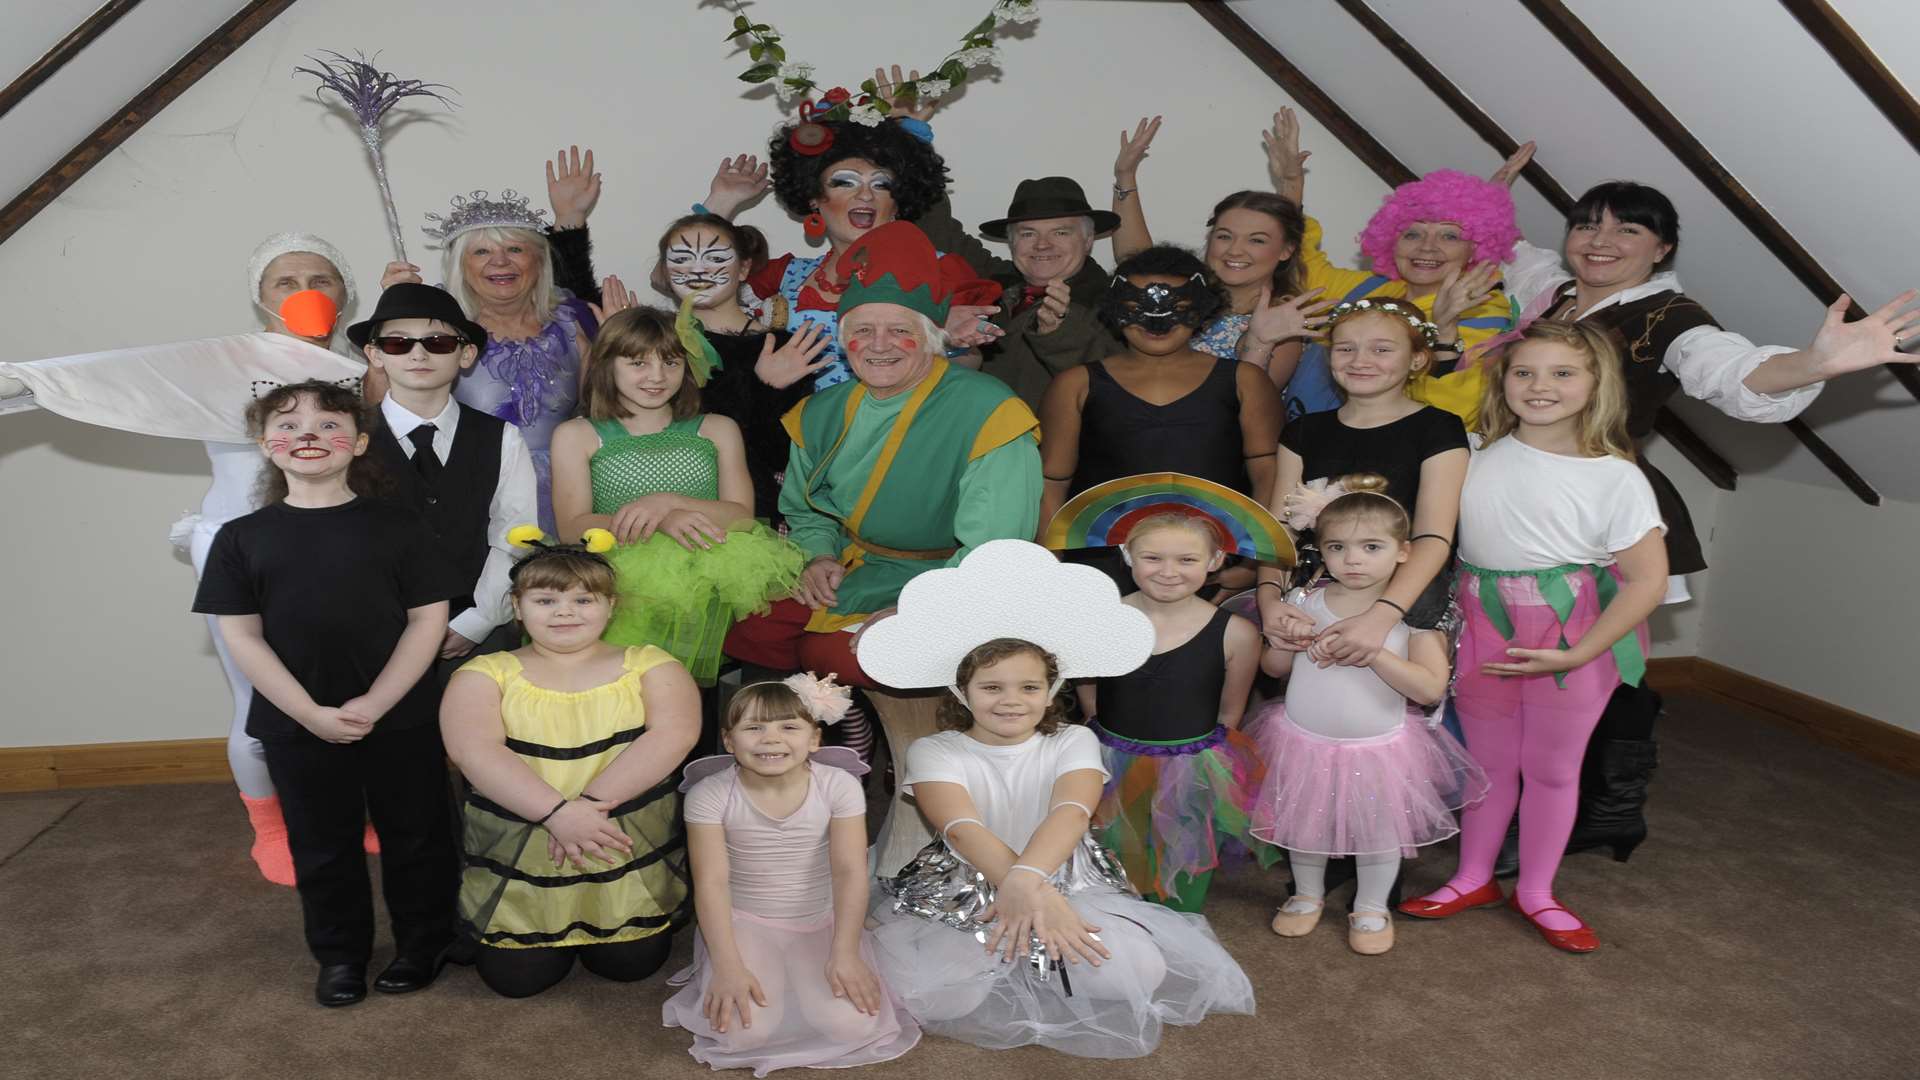 The cast of this year's New Ash Players panto Jack and the Beanstalk